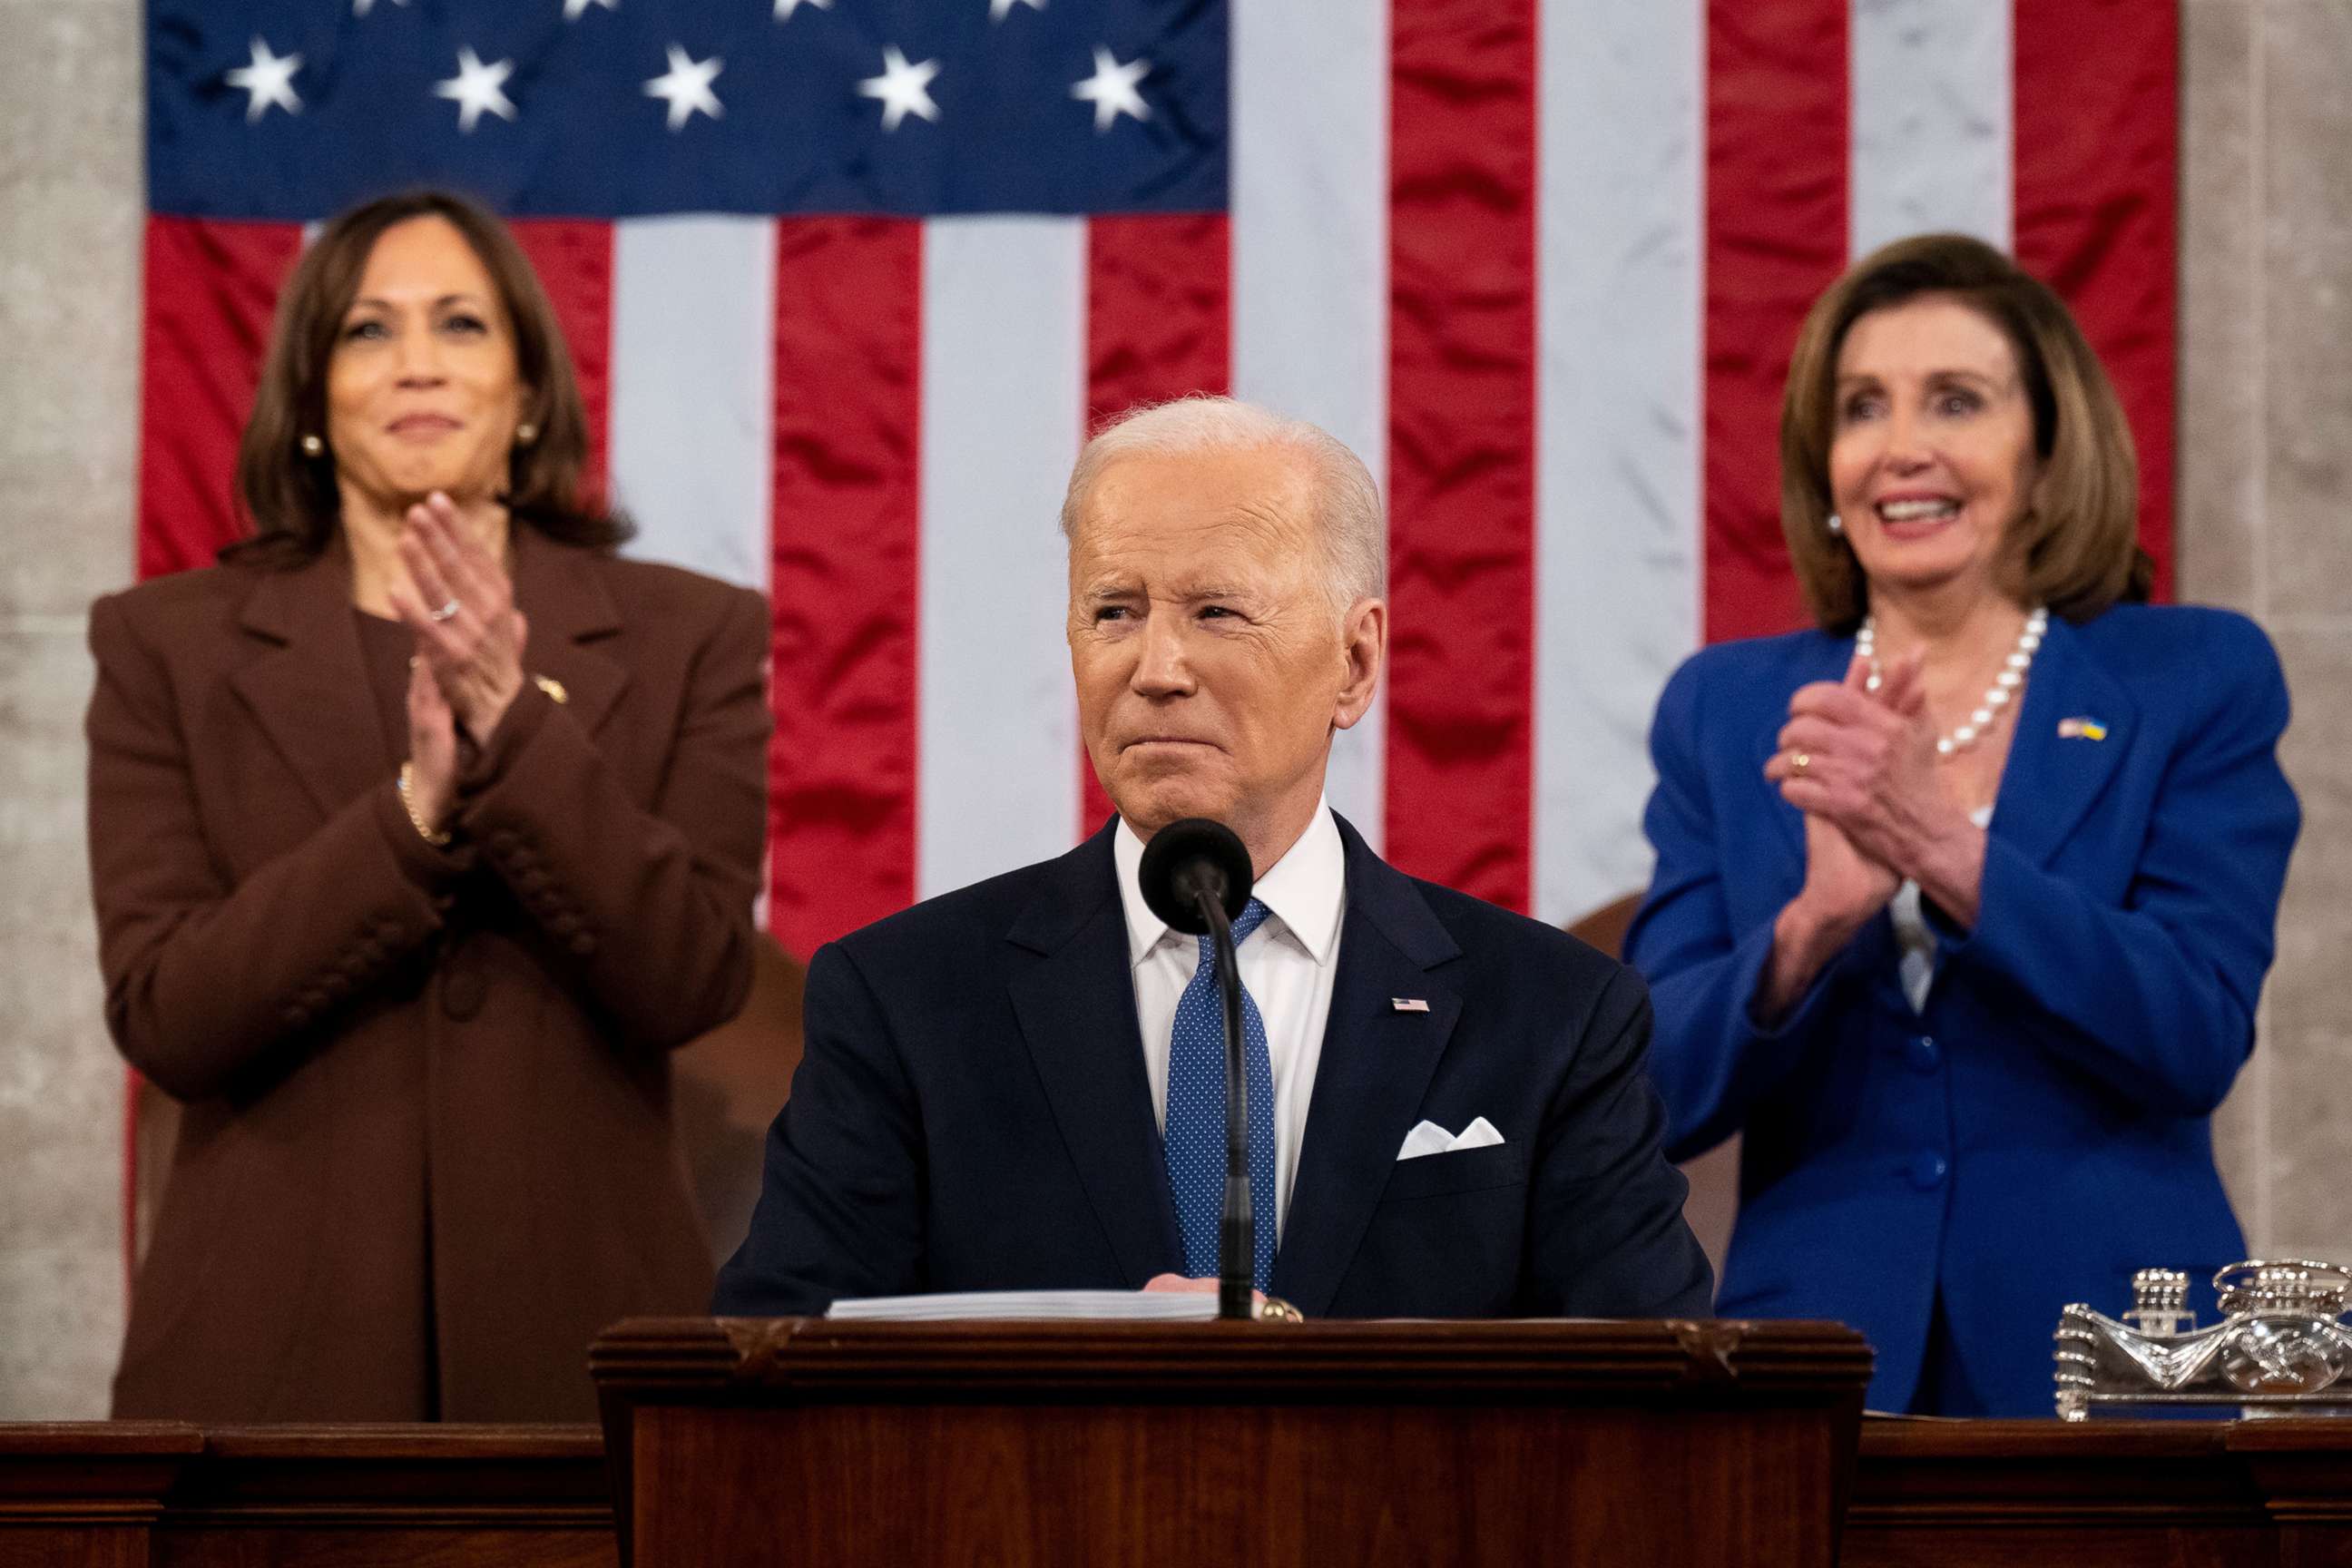 PHOTO: President Joe Biden delivers the State of the Union address to a joint session of Congress at the US Capitol in Washington, D.C., March 1, 2022.